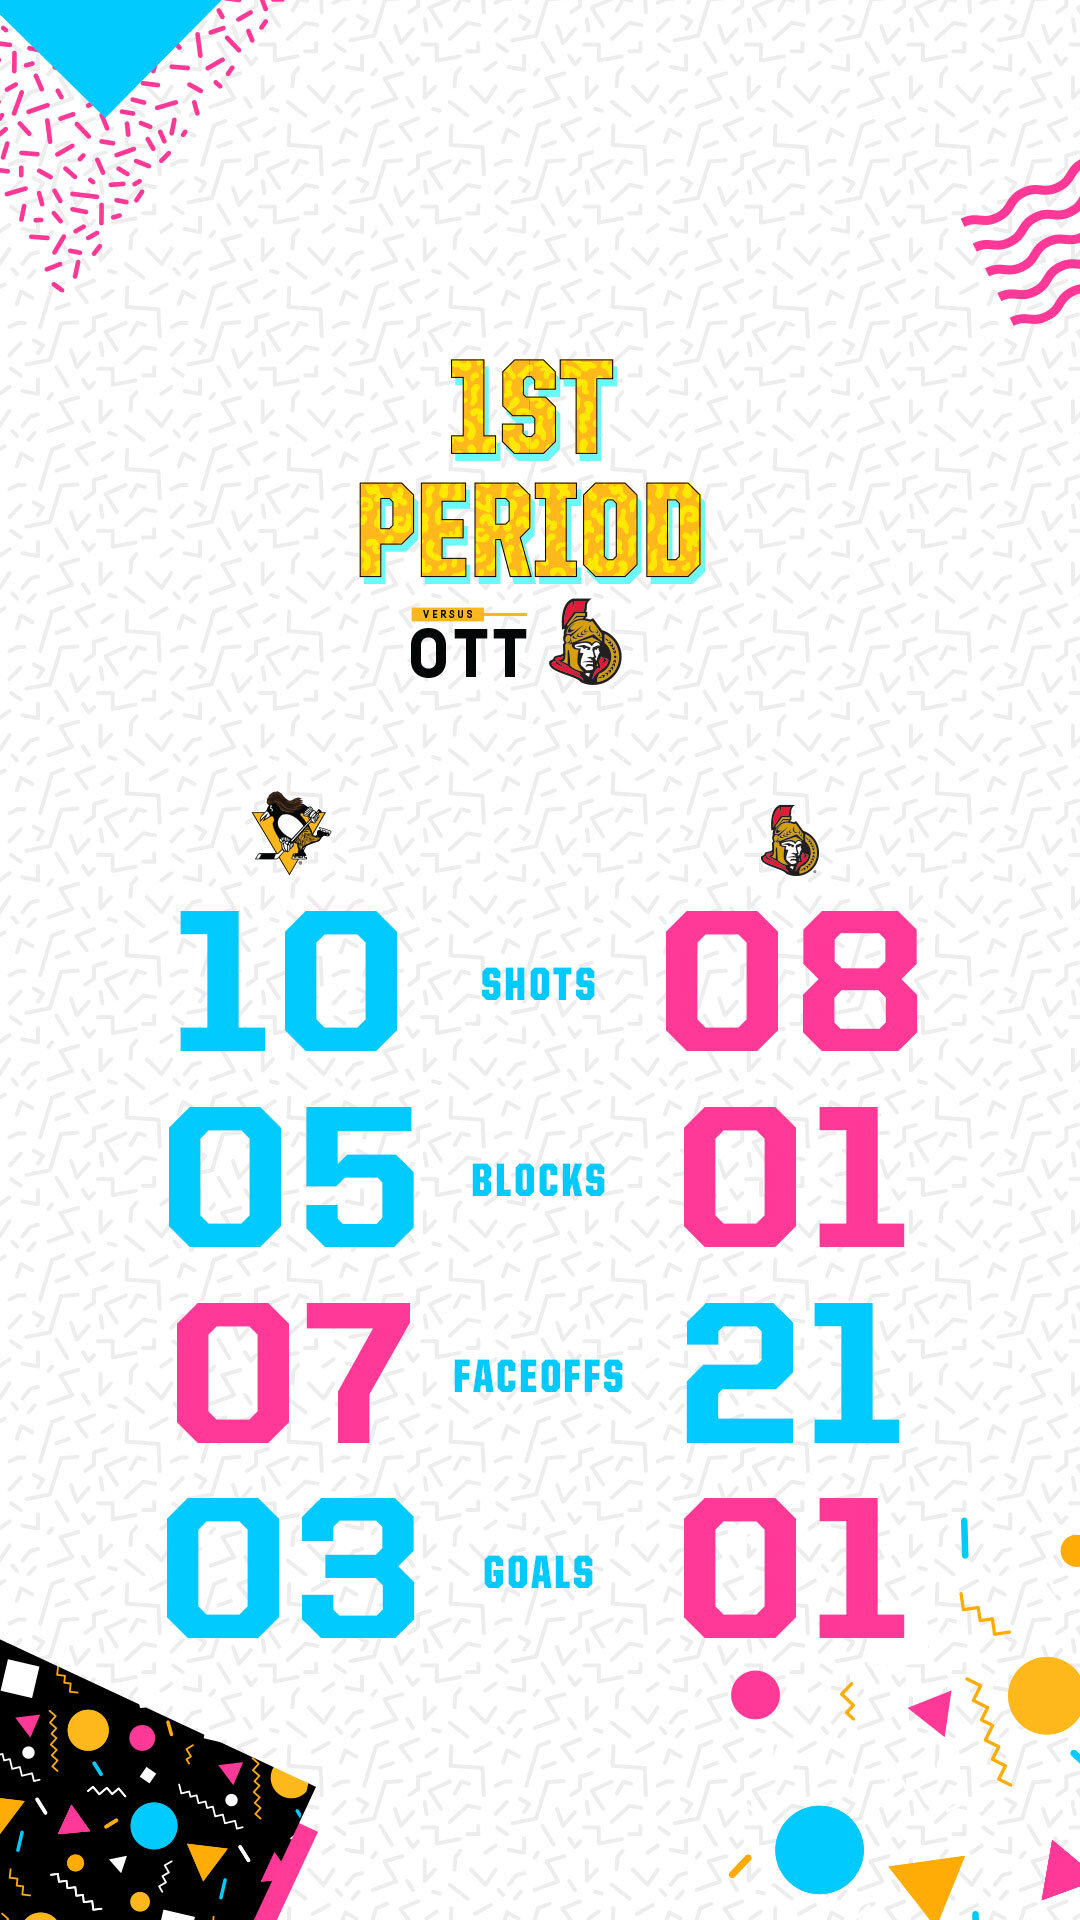 '90s Night 1st Period Stats Graphic